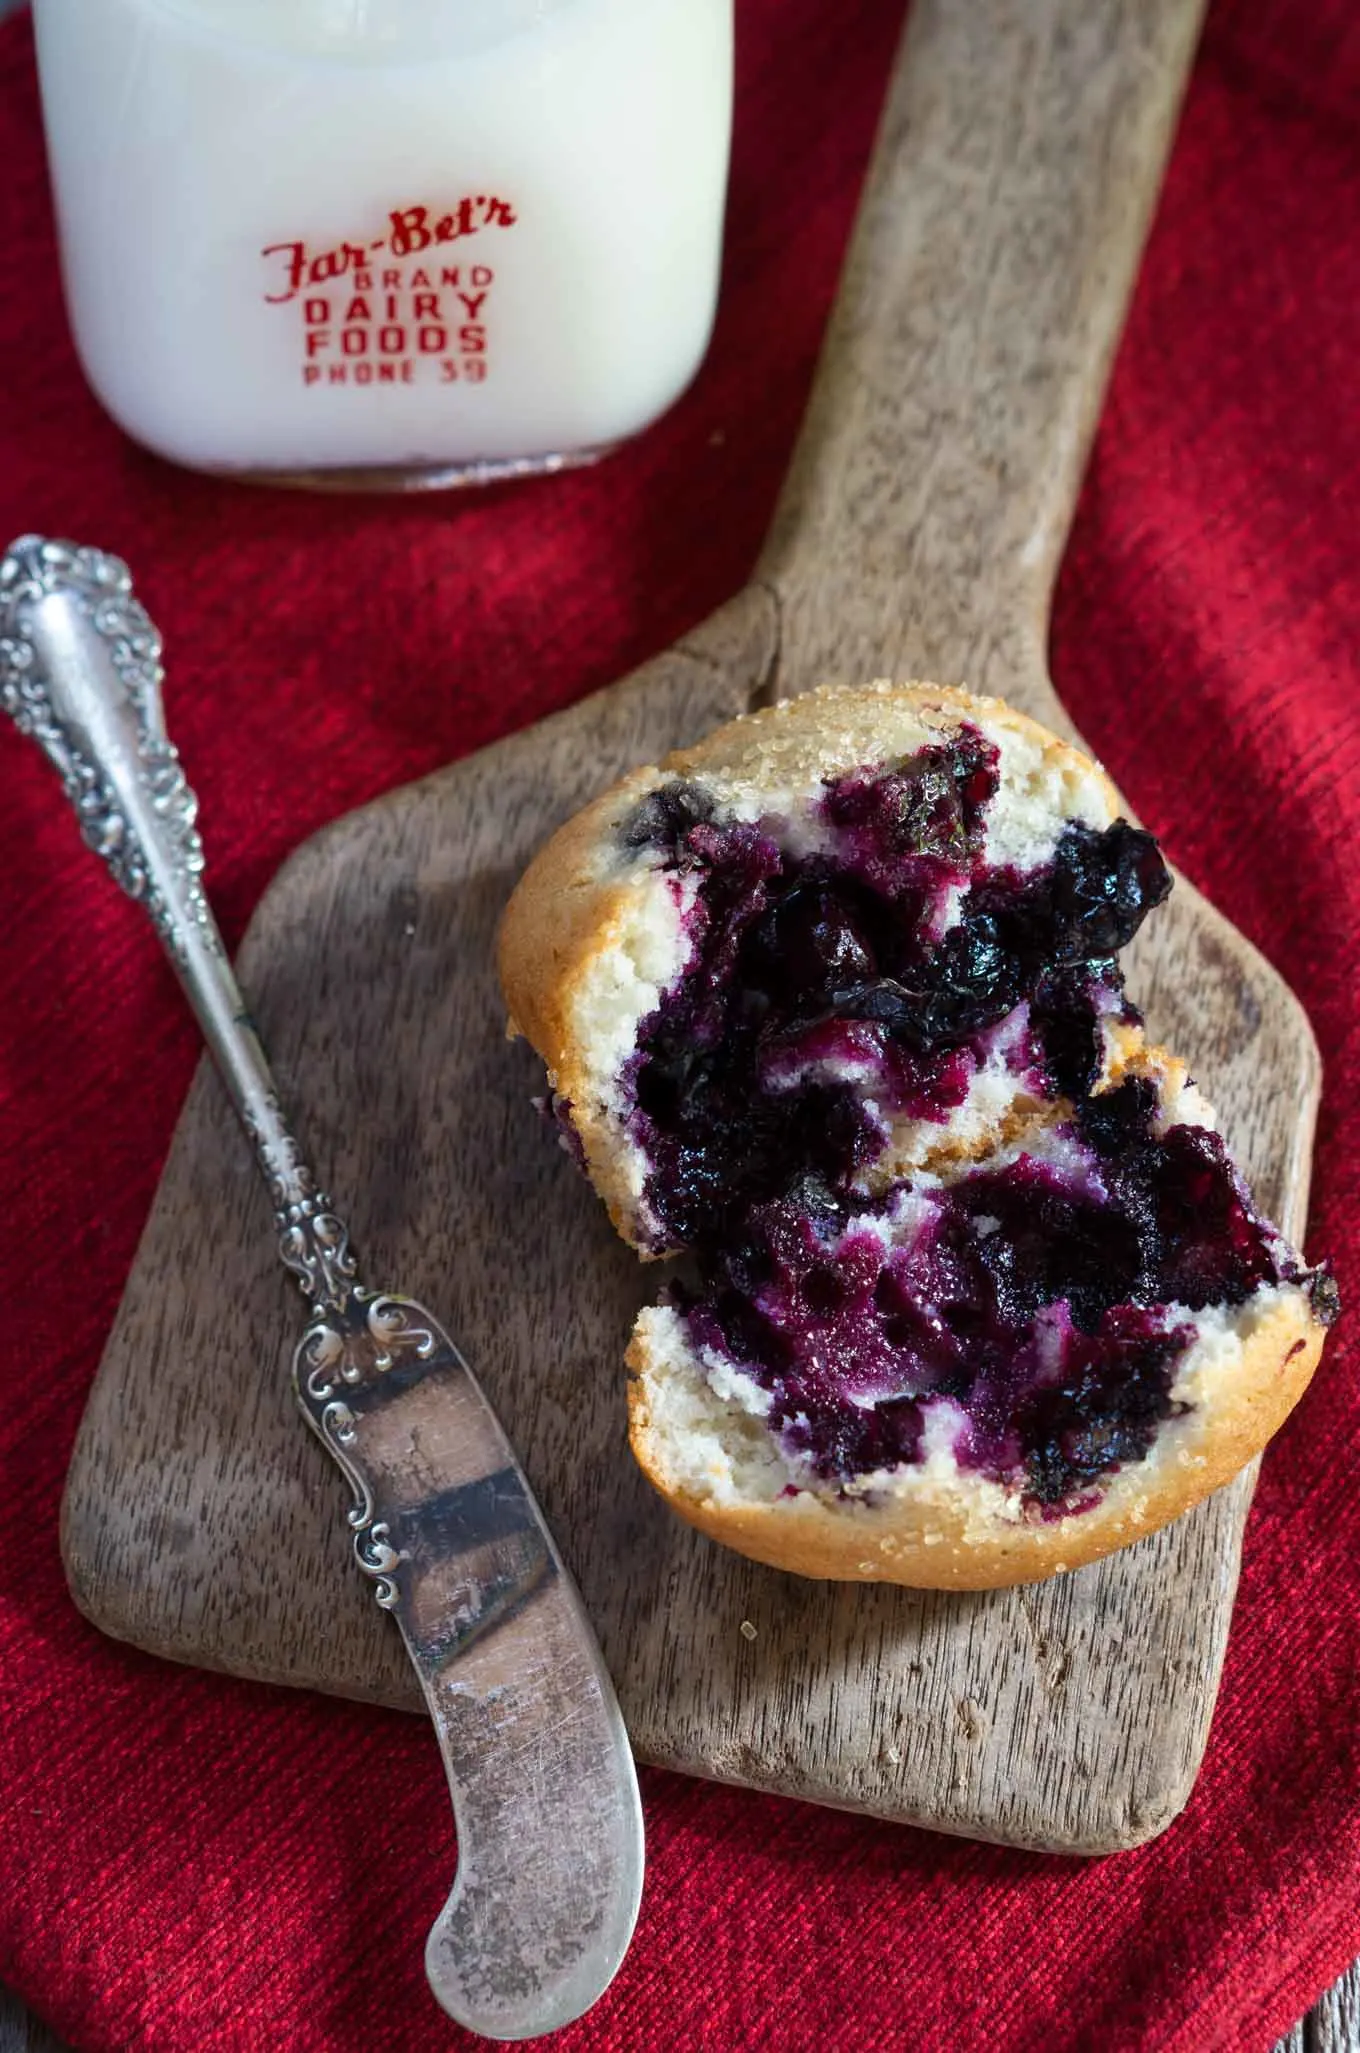 A broken open muffin loaded with blueberries sits on a wooden butter paddle nest to an antique butter knife. The paddle sits on a red napkin and a bottle of milk sits in the background.